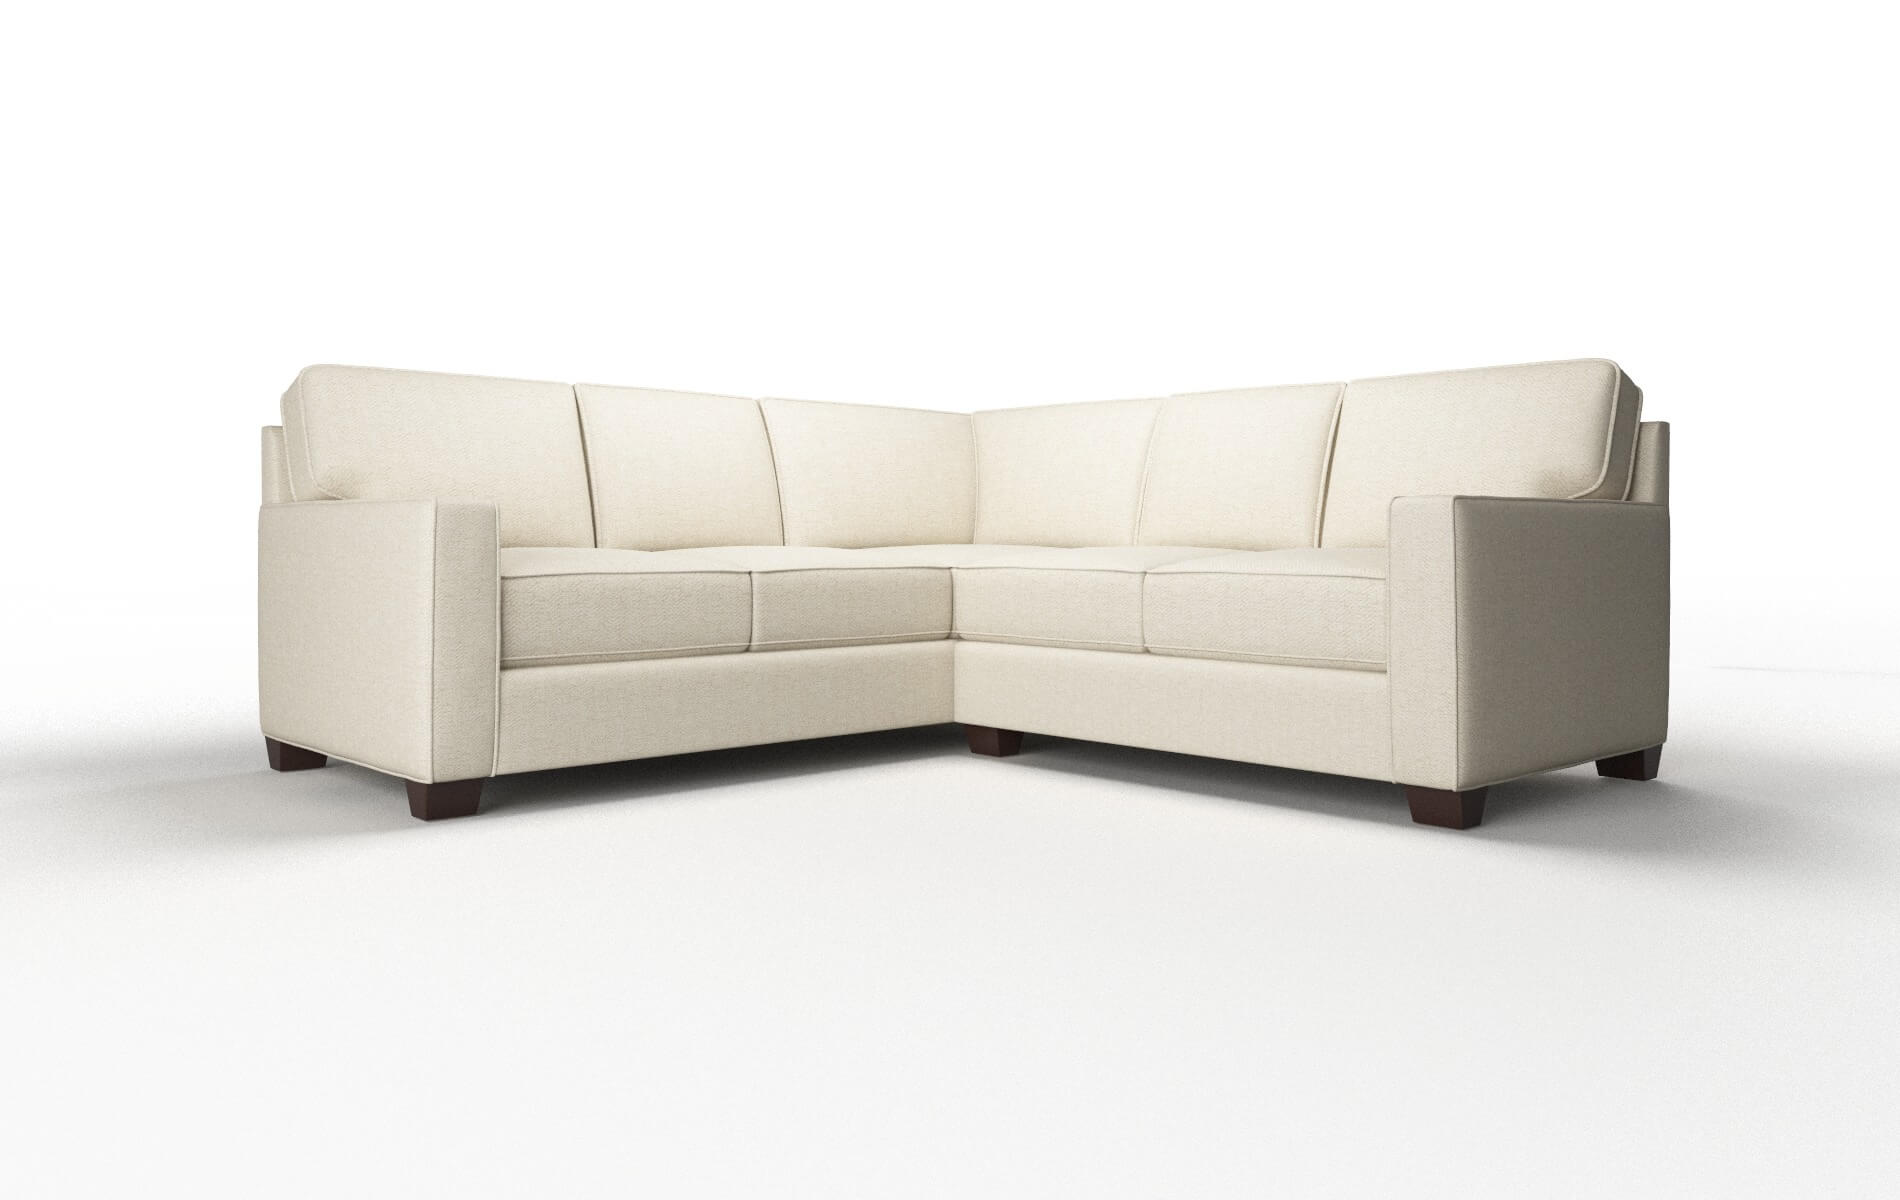 Chicago Catalina Wheat Sectional espresso legs